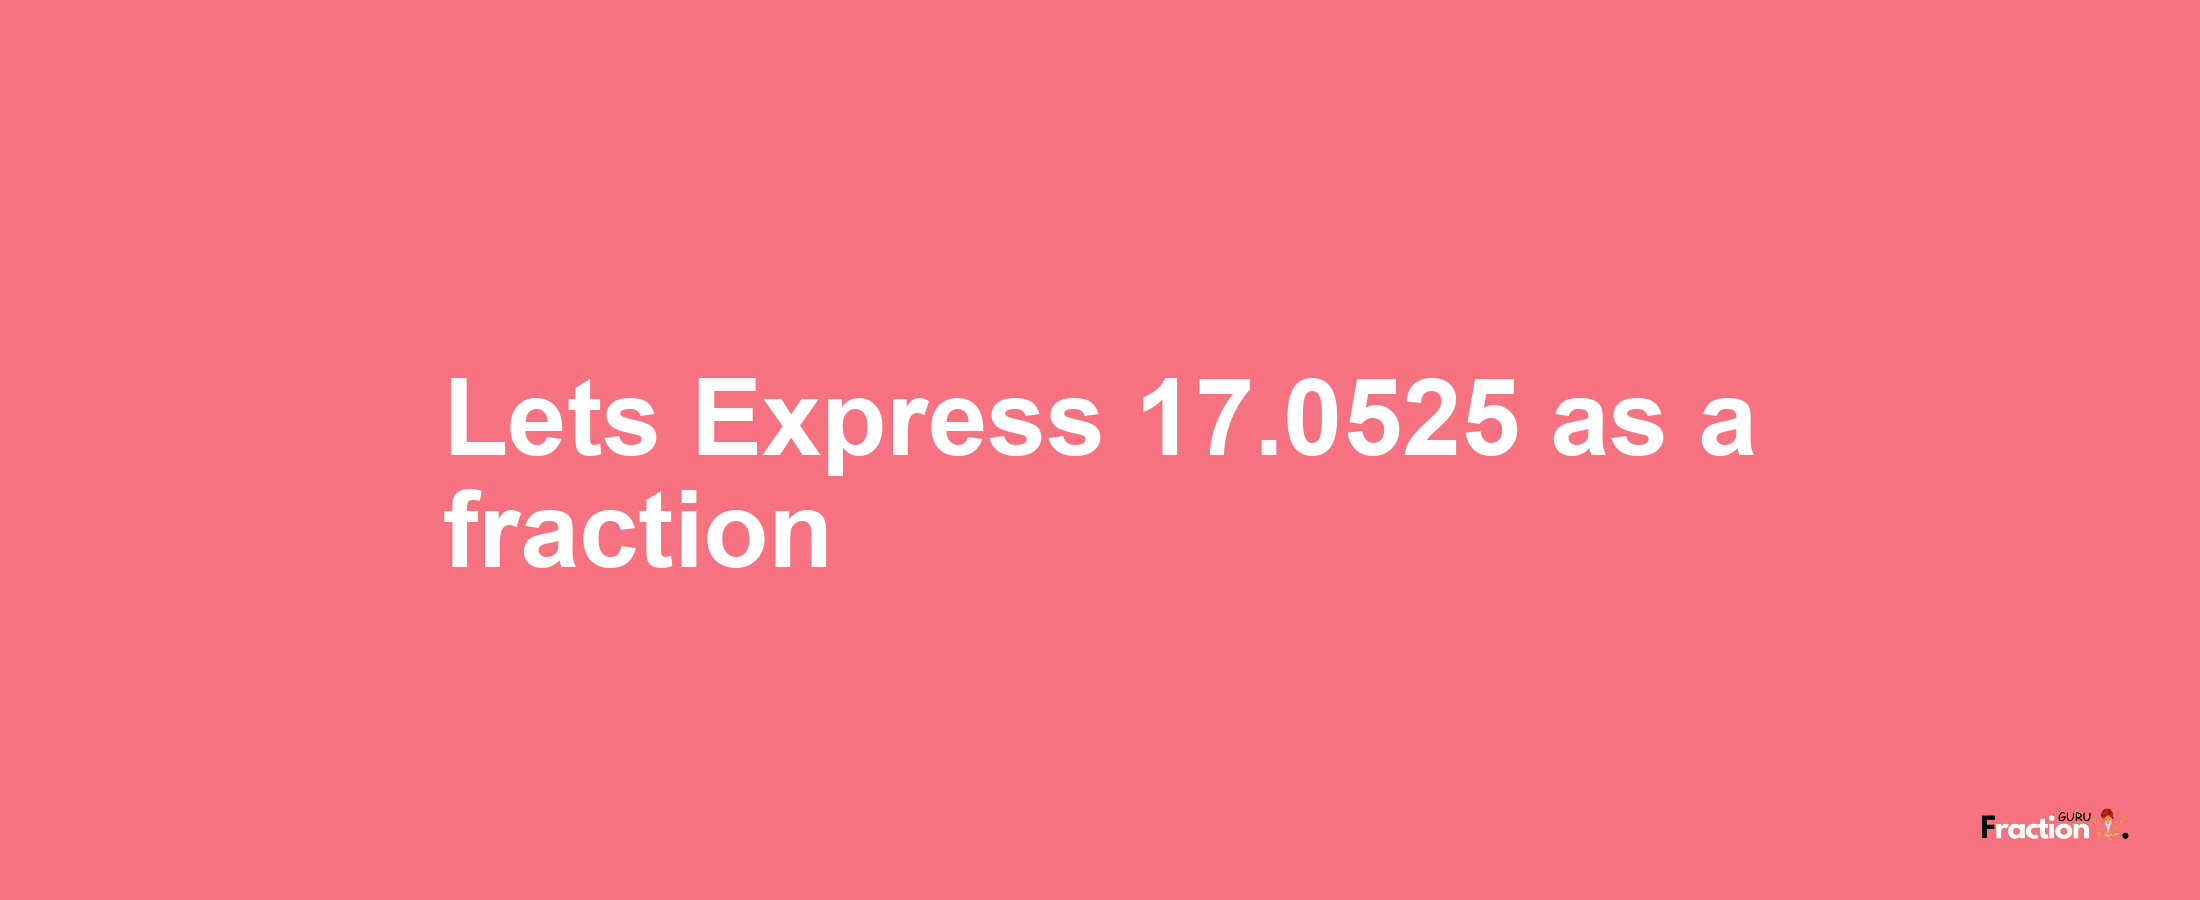 Lets Express 17.0525 as afraction